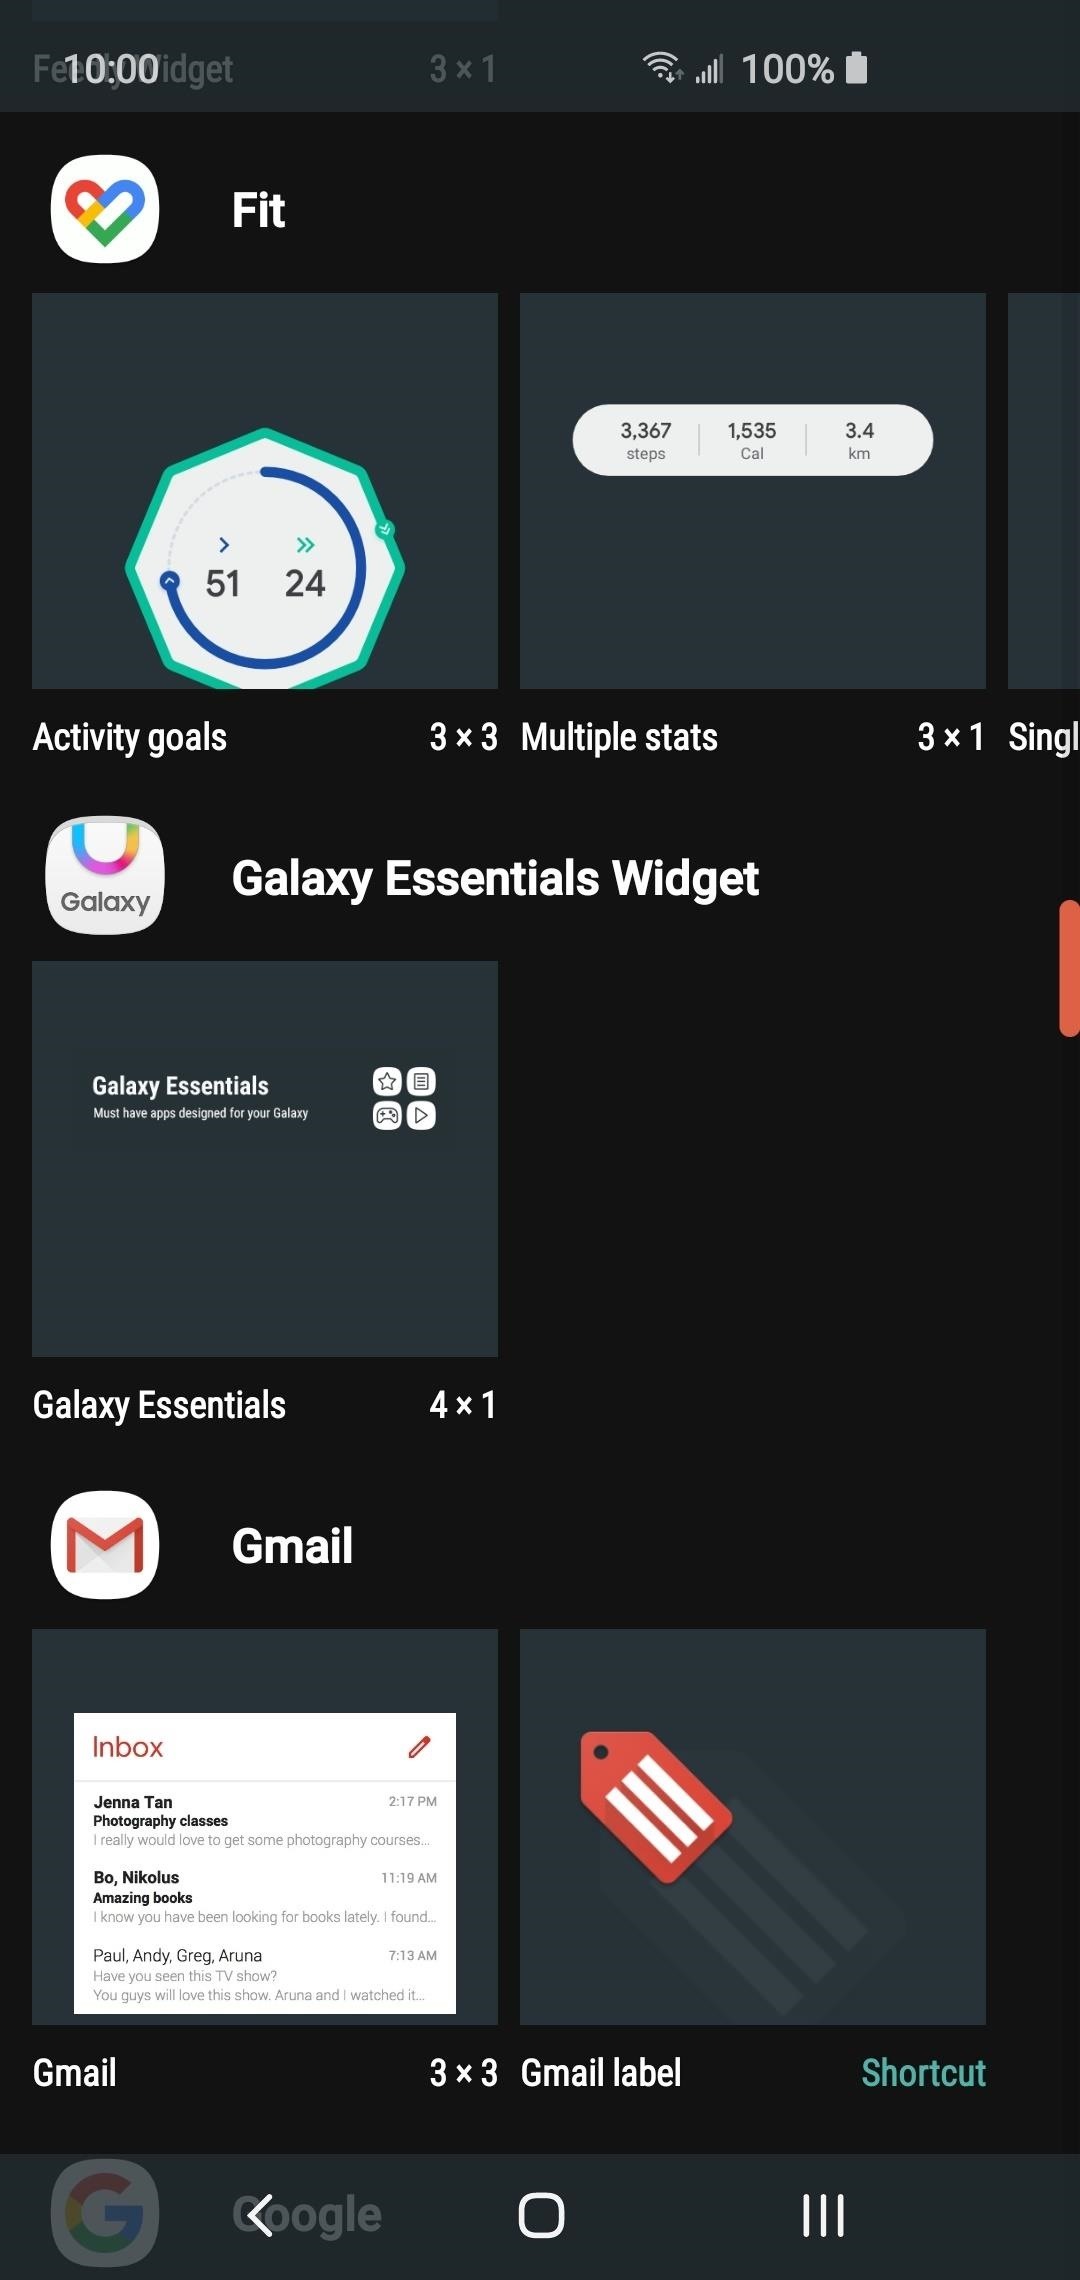 How to View Your Google Fit Workout Activity from Your Home Screen